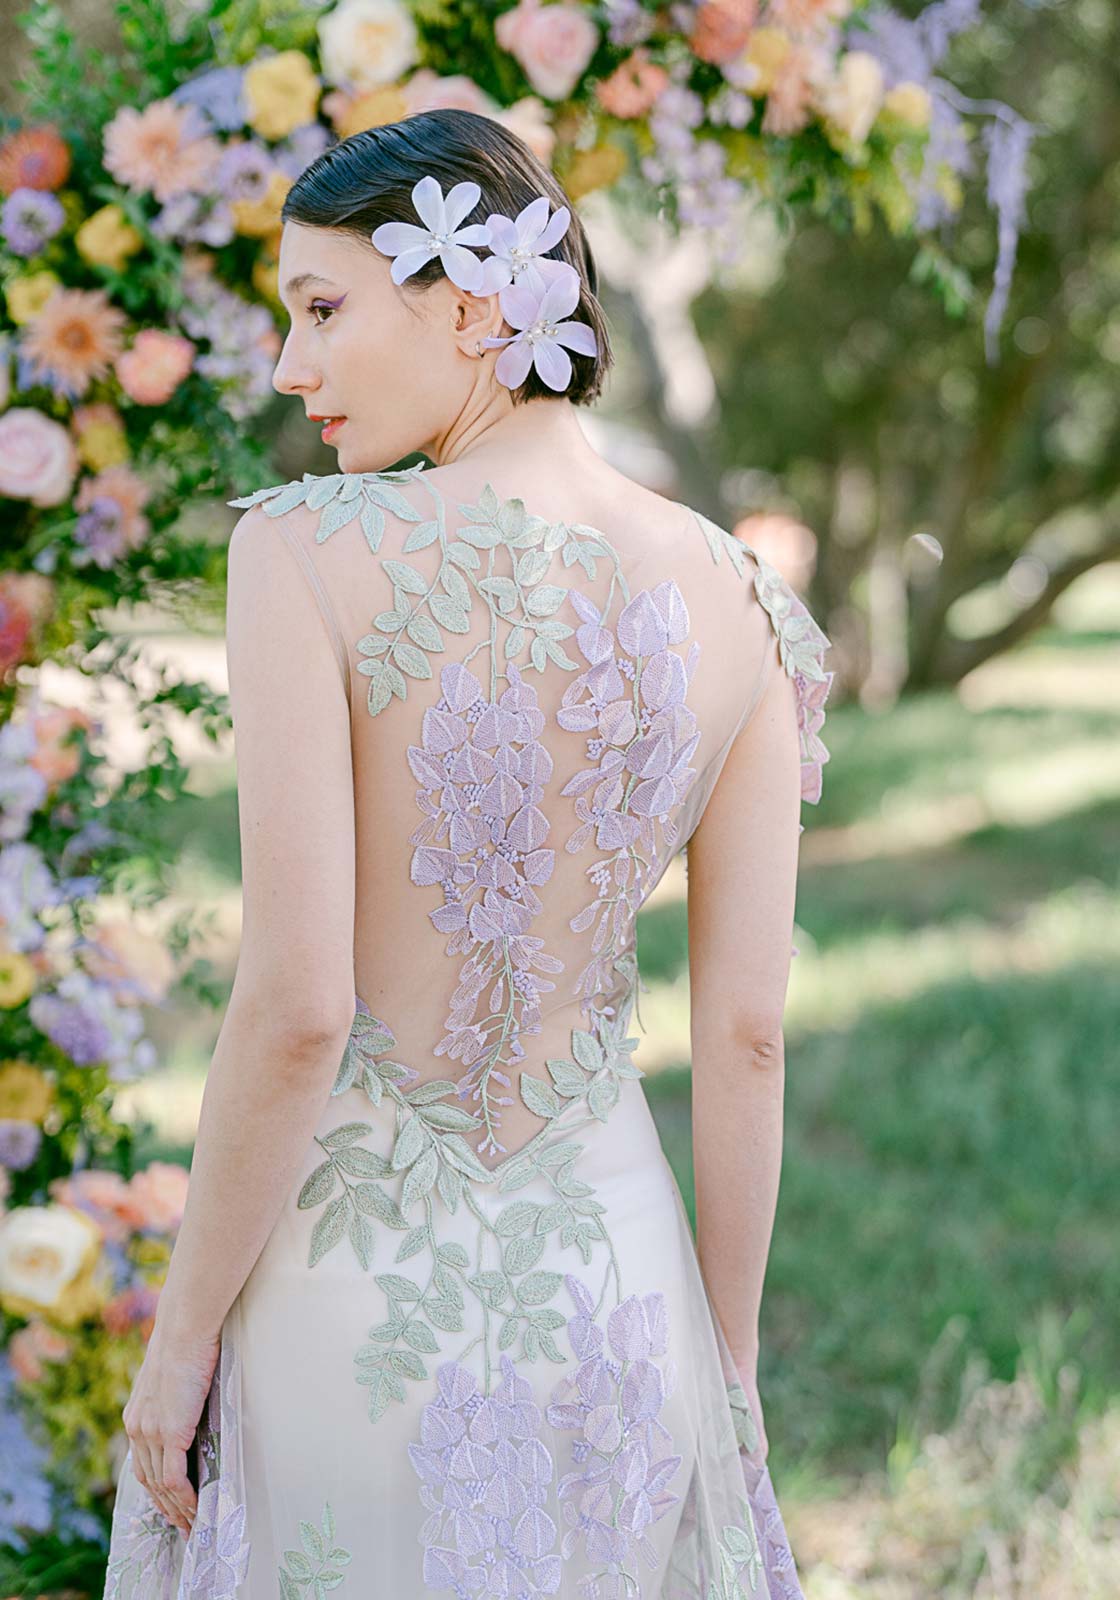 Back detail of colorful embroidery of the Wisteria designer couture wedding gown.